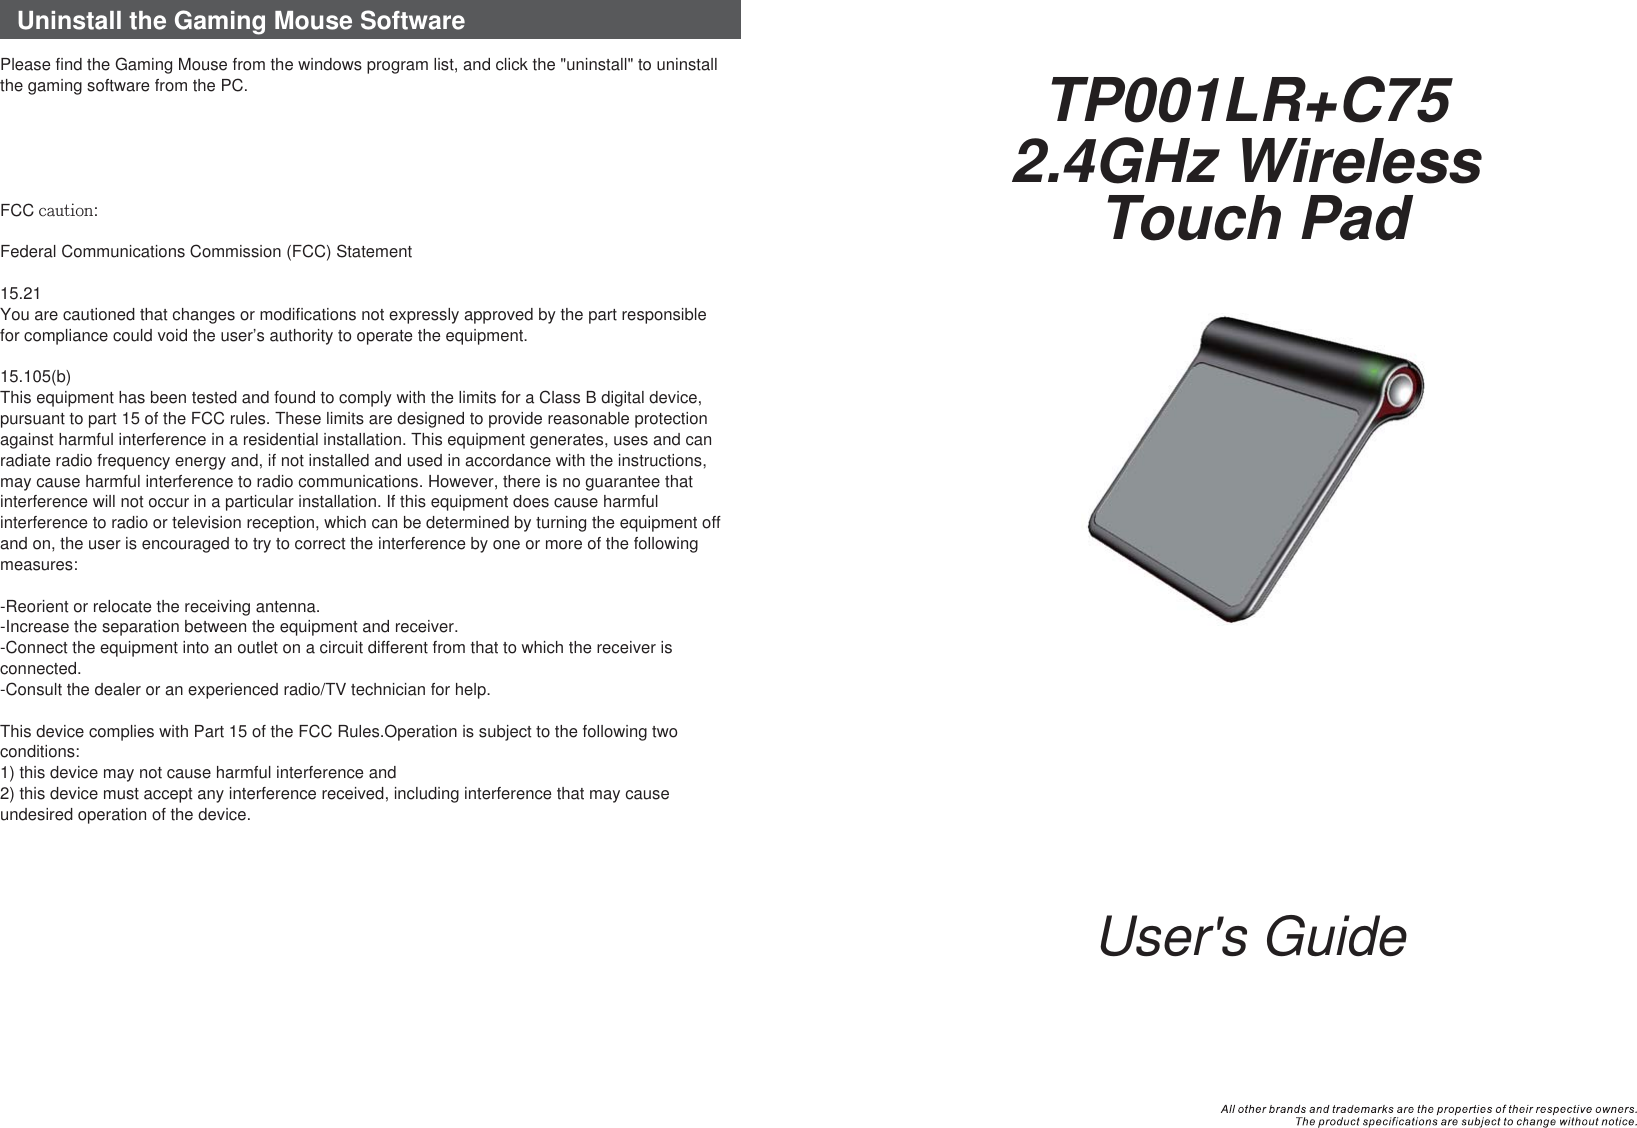 User&apos;s Guide2.4GHz Wireless Touch PadTP001LR+C75Uninstall the Gaming Mouse SoftwarePlease find the Gaming Mouse from the windows program list, and click the &quot;uninstall&quot; to uninstall the gaming software from the PC.FCC caution:Federal Communications Commission (FCC) Statement15.21You are cautioned that changes or modifications not expressly approved by the part responsible for compliance could void the user’s authority to operate the equipment.15.105(b)This equipment has been tested and found to comply with the limits for a Class B digital device, pursuant to part 15 of the FCC rules. These limits are designed to provide reasonable protection against harmful interference in a residential installation. This equipment generates, uses and can radiate radio frequency energy and, if not installed and used in accordance with the instructions, may cause harmful interference to radio communications. However, there is no guarantee that interference will not occur in a particular installation. If this equipment does cause harmful interference to radio or television reception, which can be determined by turning the equipment off and on, the user is encouraged to try to correct the interference by one or more of the following measures:-Reorient or relocate the receiving antenna.-Increase the separation between the equipment and receiver.-Connect the equipment into an outlet on a circuit different from that to which the receiver is connected.-Consult the dealer or an experienced radio/TV technician for help.This device complies with Part 15 of the FCC Rules.Operation is subject to the following two conditions:1) this device may not cause harmful interference and2) this device must accept any interference received, including interference that may cause undesired operation of the device.